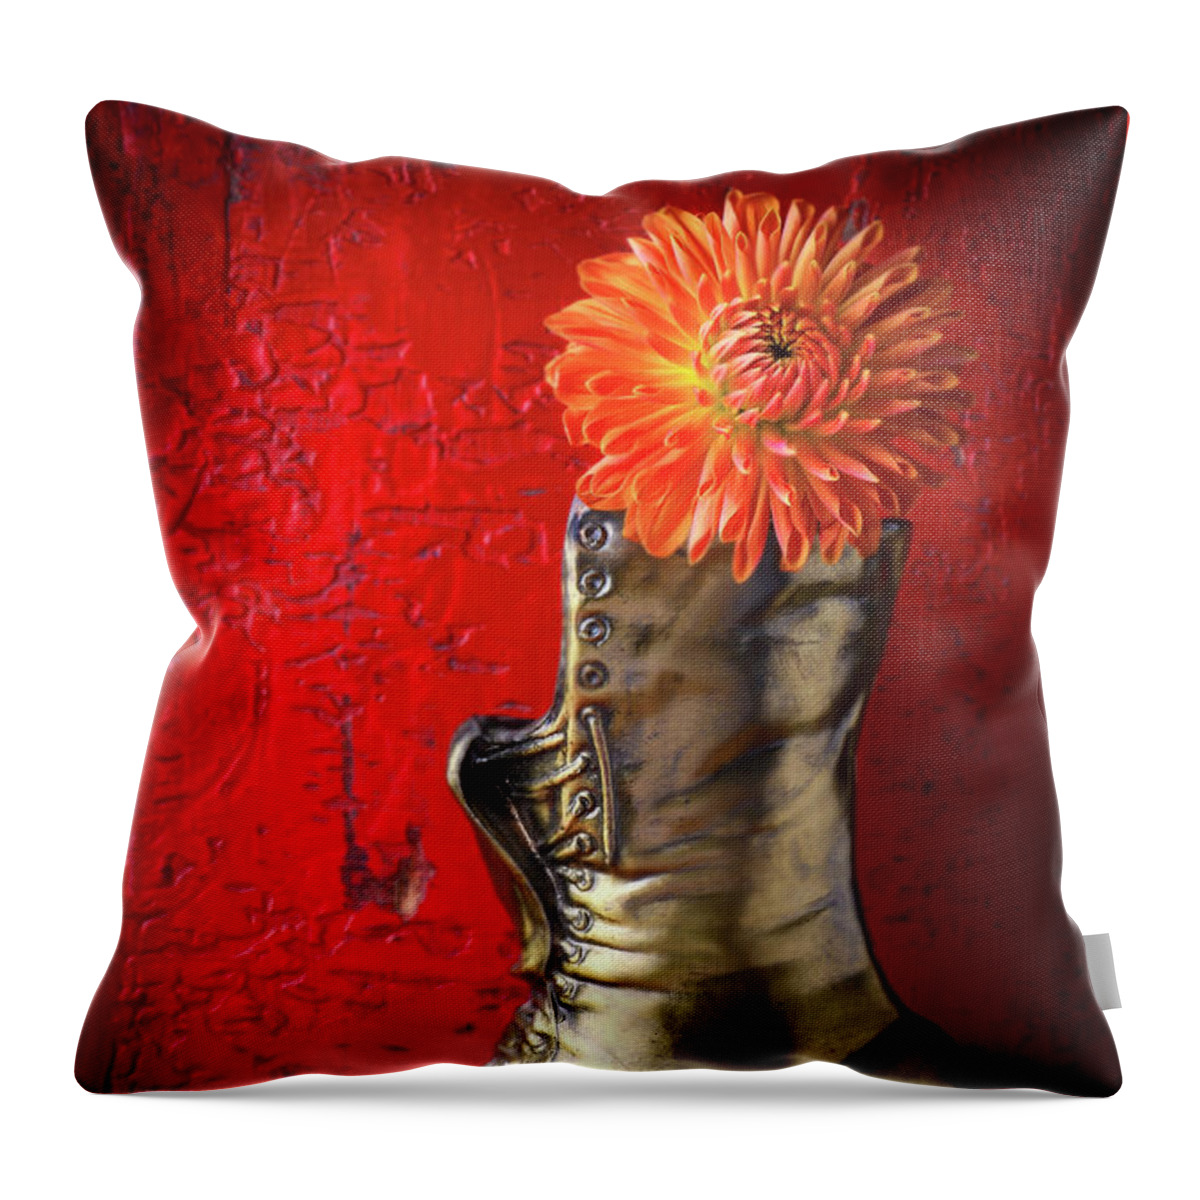 Brass Throw Pillow featuring the photograph Orange Dahlia In Brass Boot Vase by Garry Gay